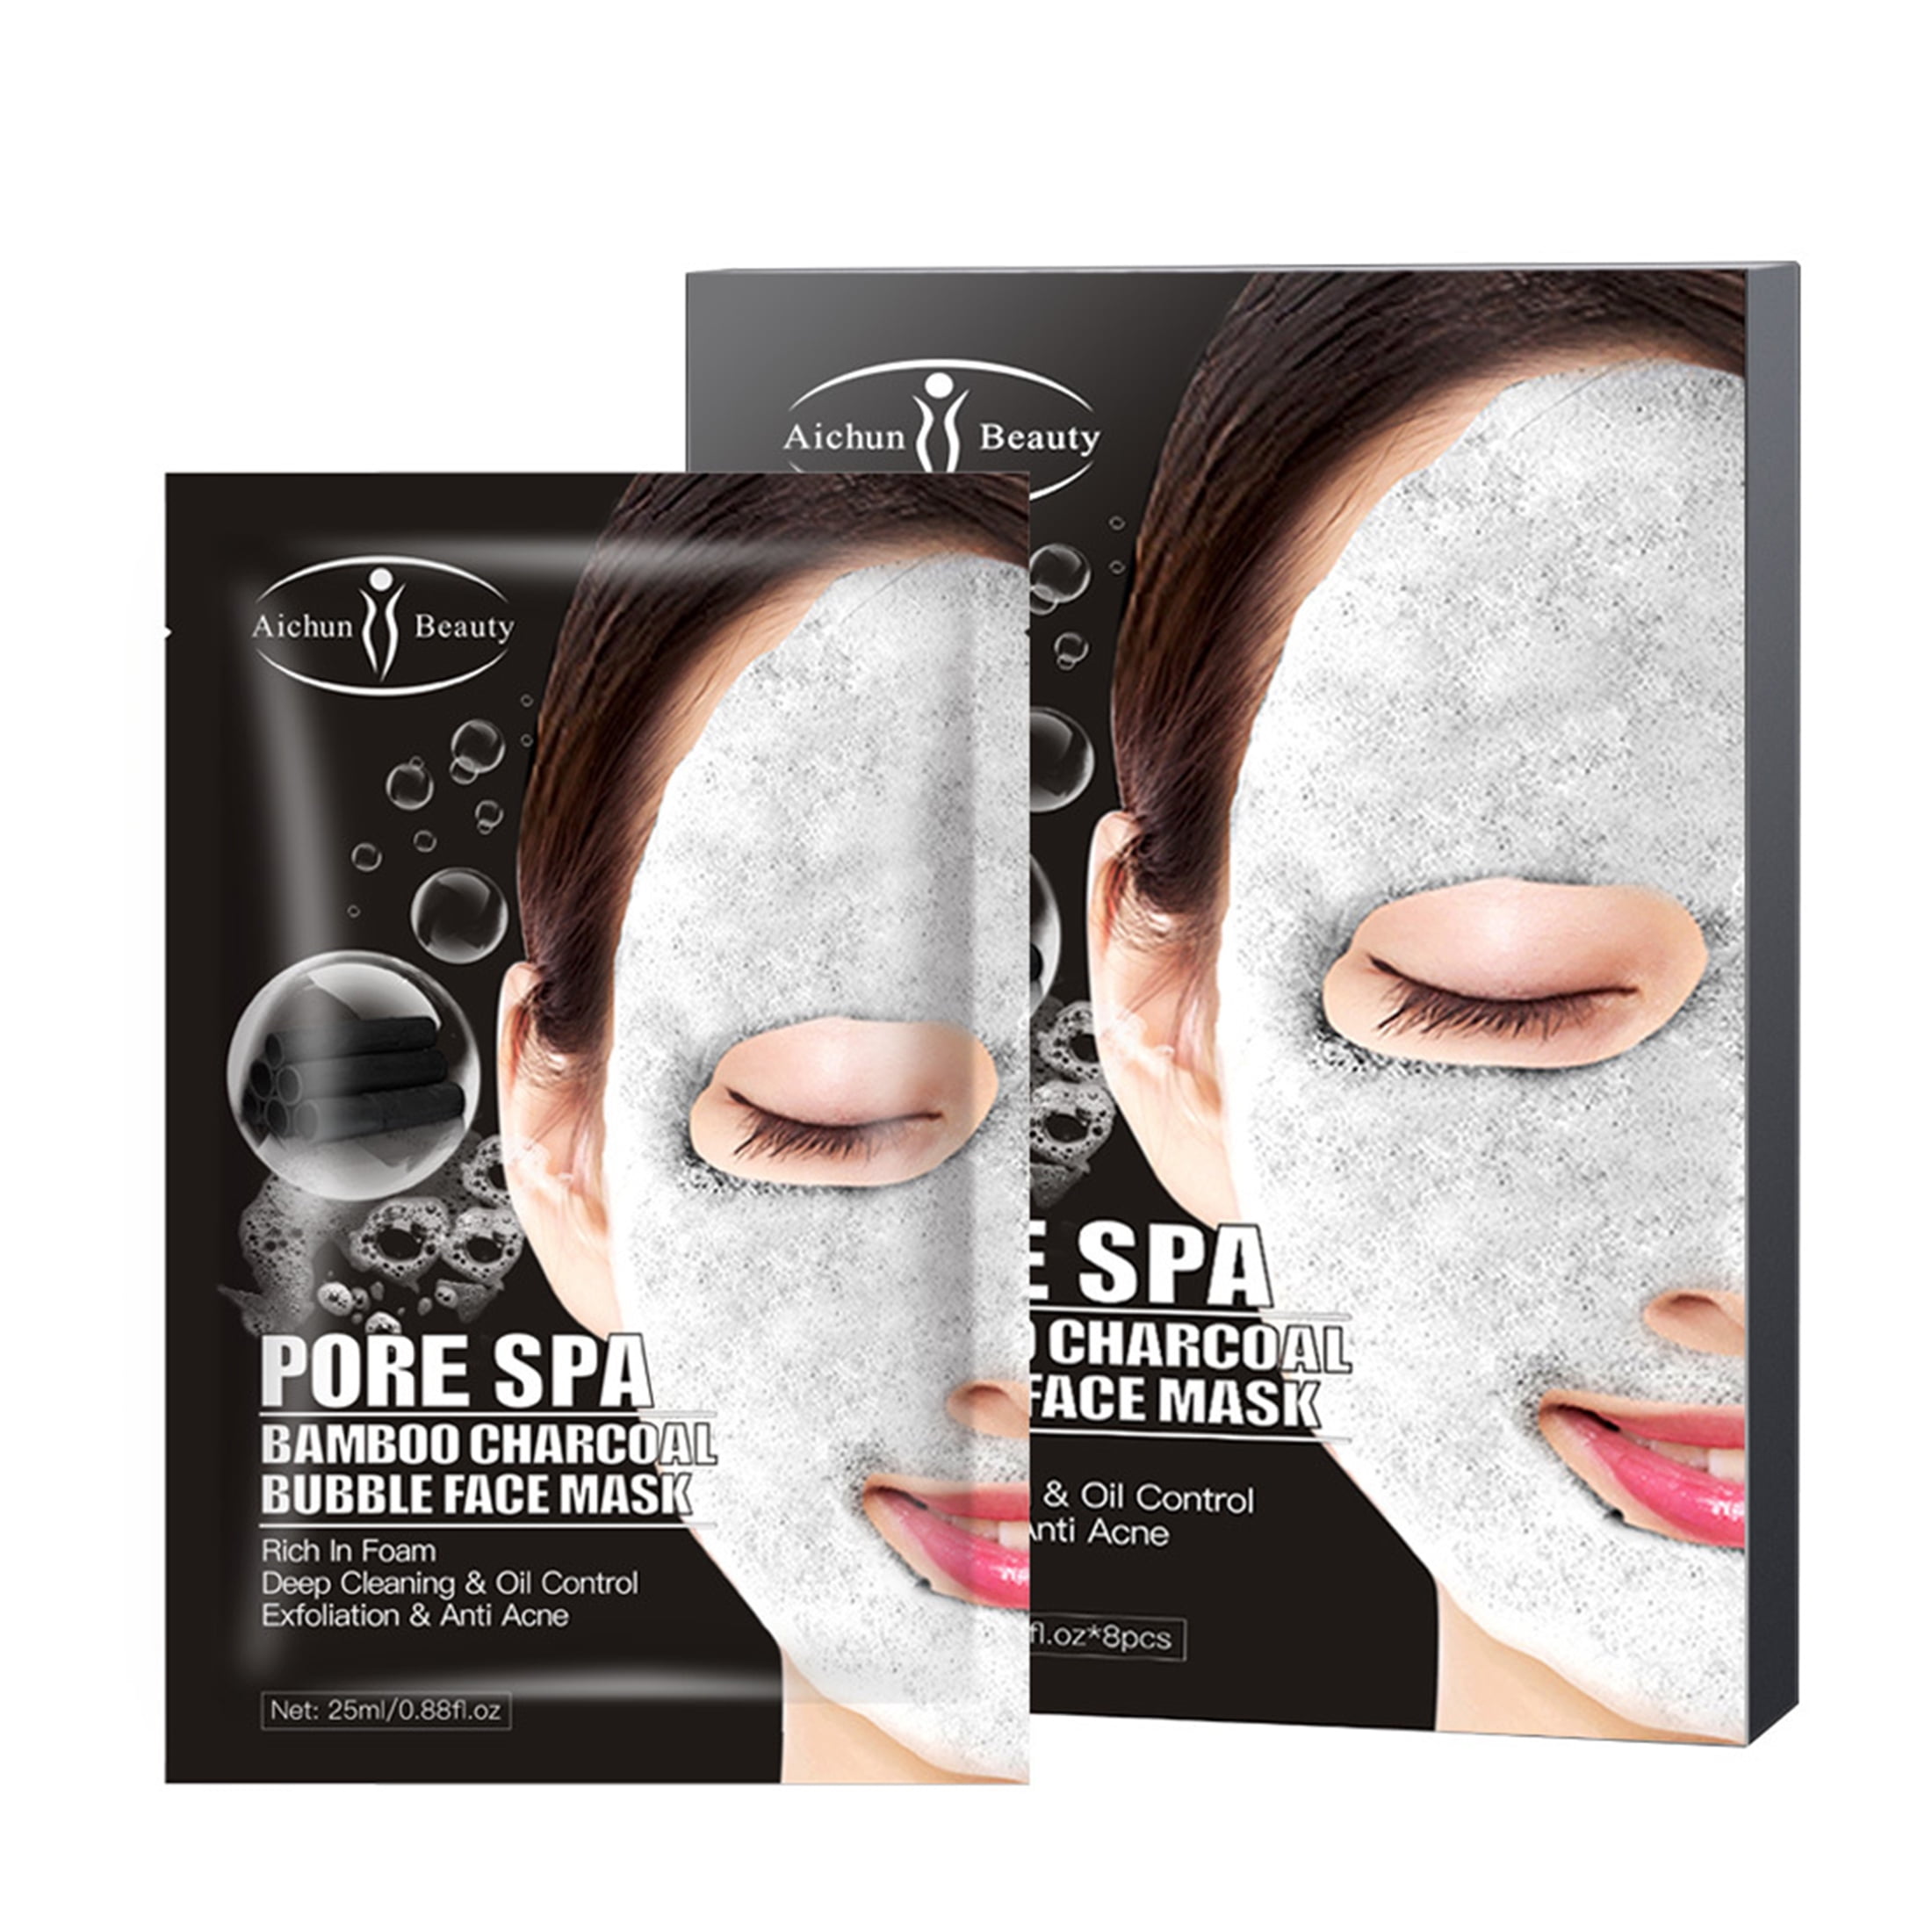 Bamboo Charcoal Facial Mask Skin Care (8 Pack) -Beauty Bubble Face Sheet Mask for Moisturizing and Hydrating - Shrinking Oil-control Cleansing Face - Walmart.com